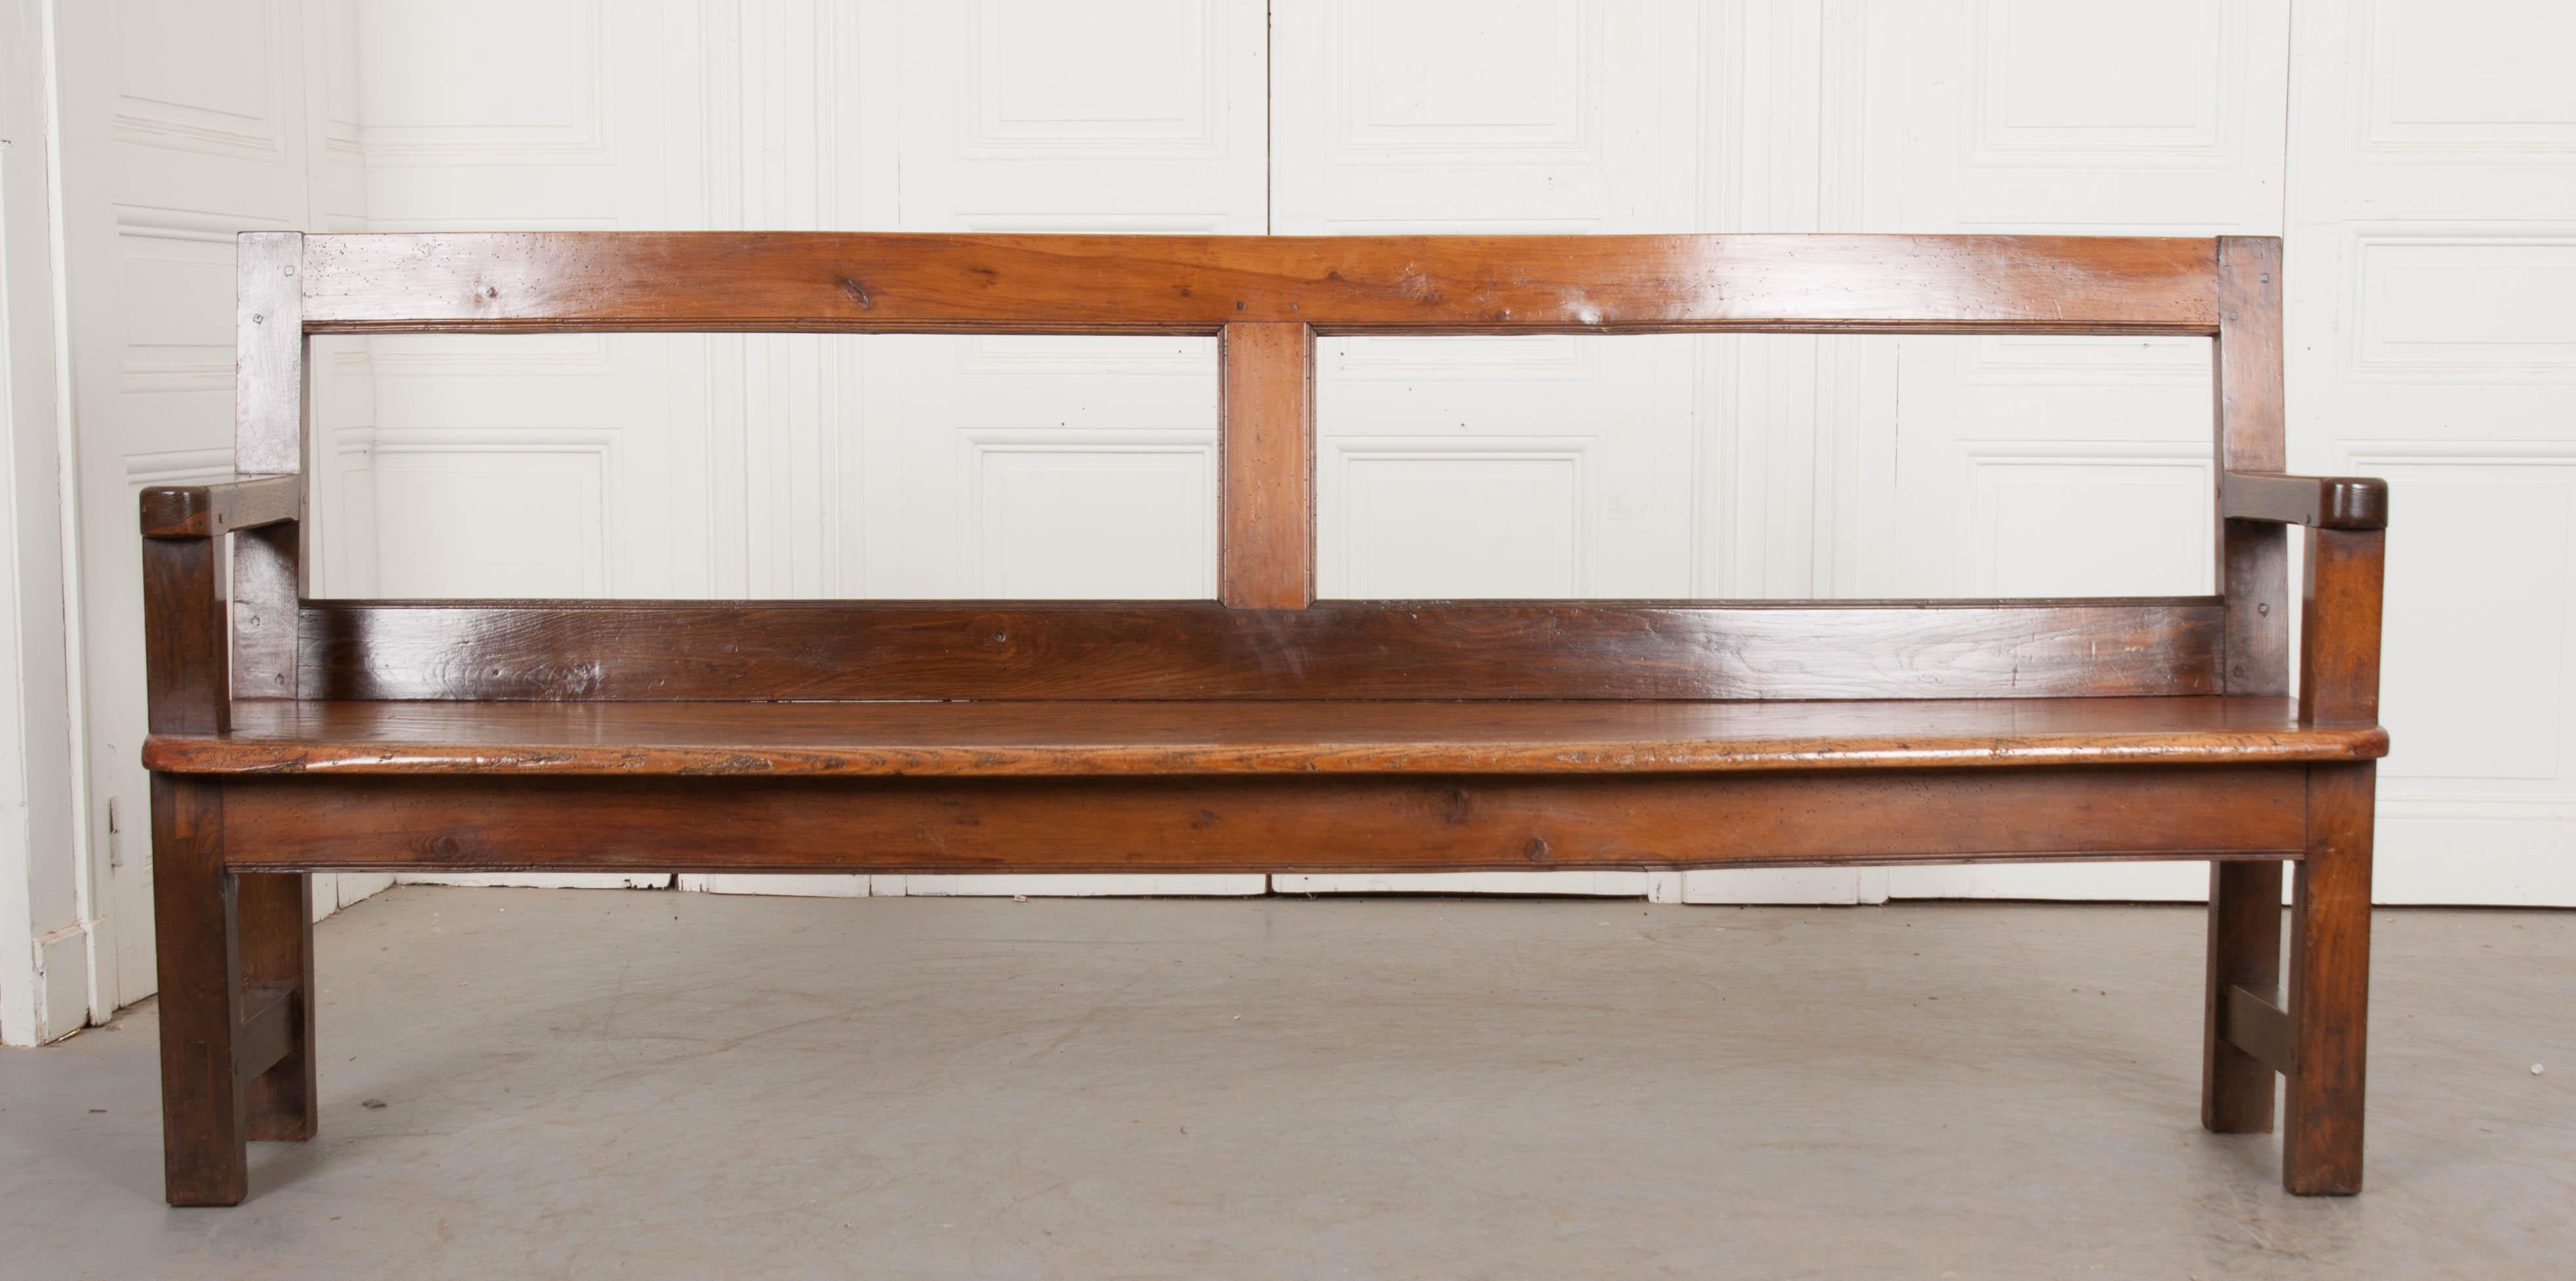 This handsome Arts & Crafts oak bench, circa 1880s, is from England. The geometric form and darker finish is typical of the period and it has a rich patina!